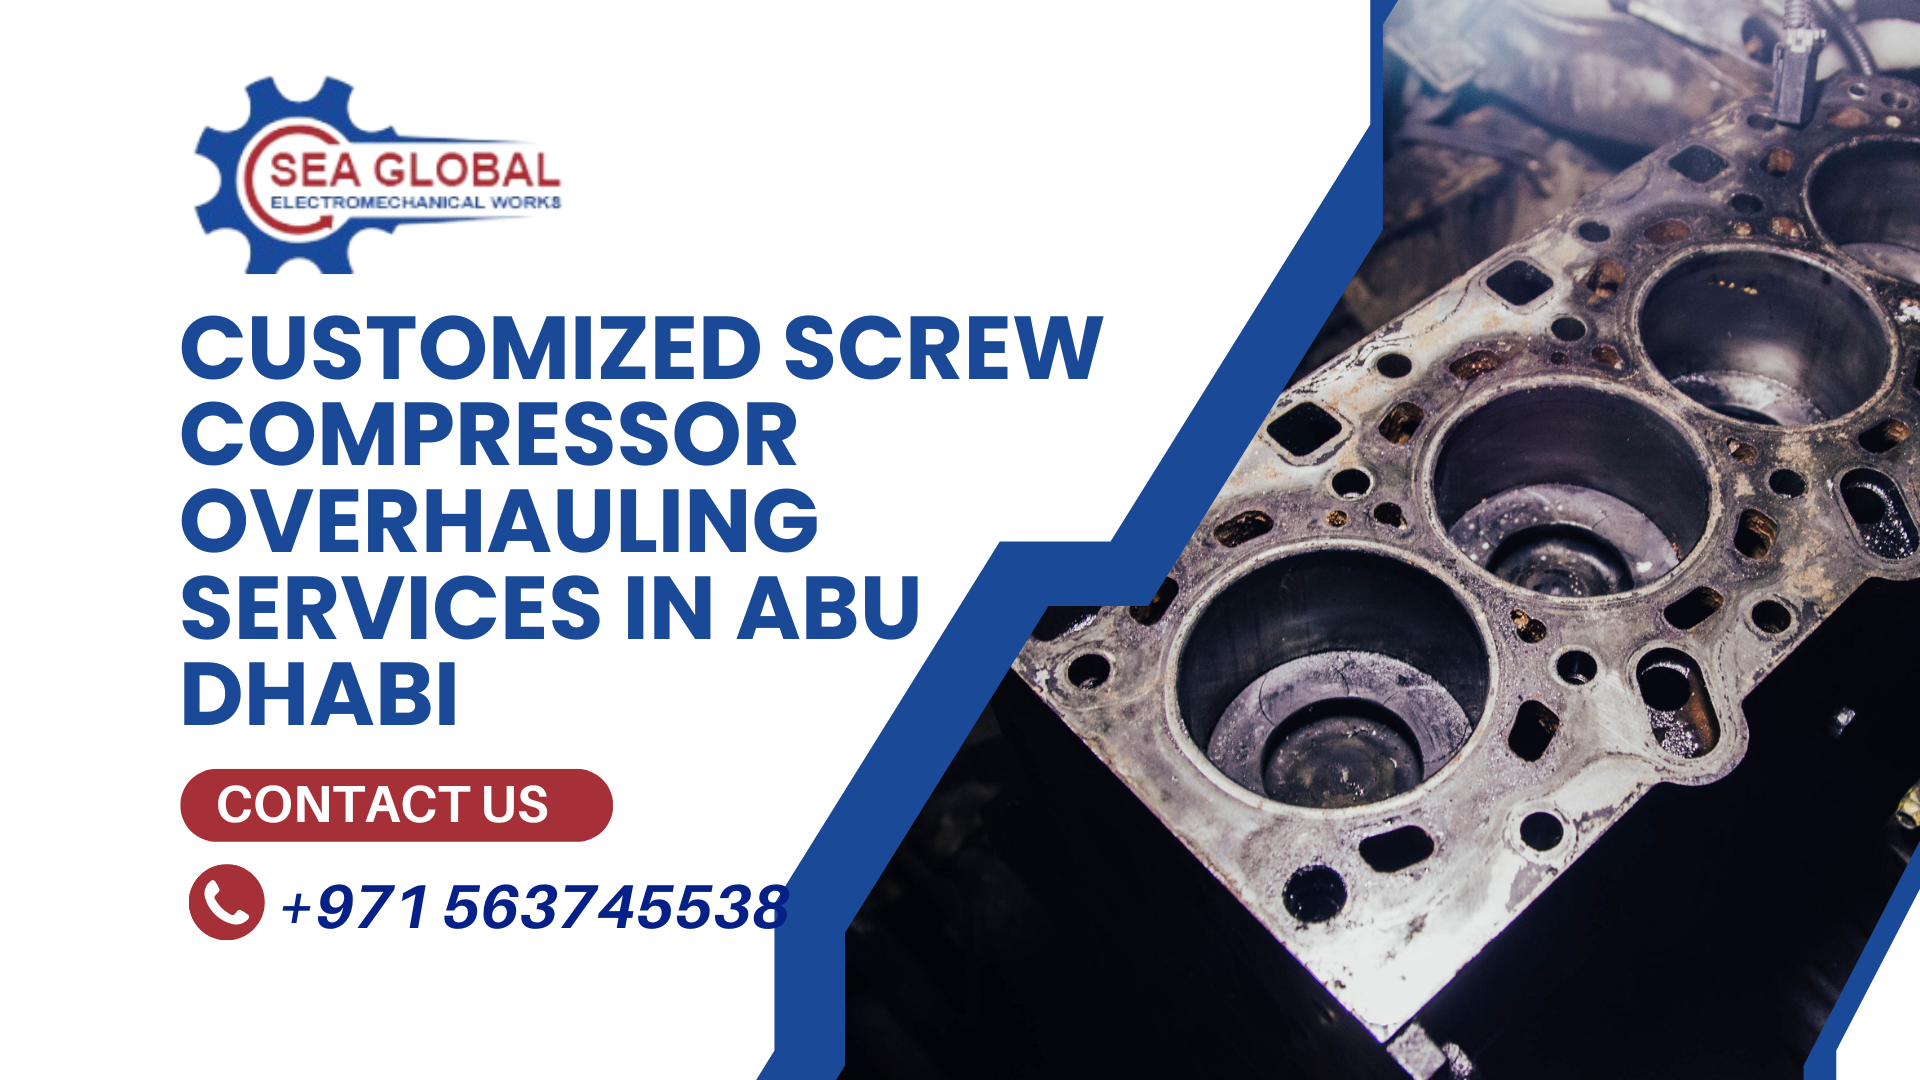 Customized Screw Compressor Overhauling Services in Abu Dhabi